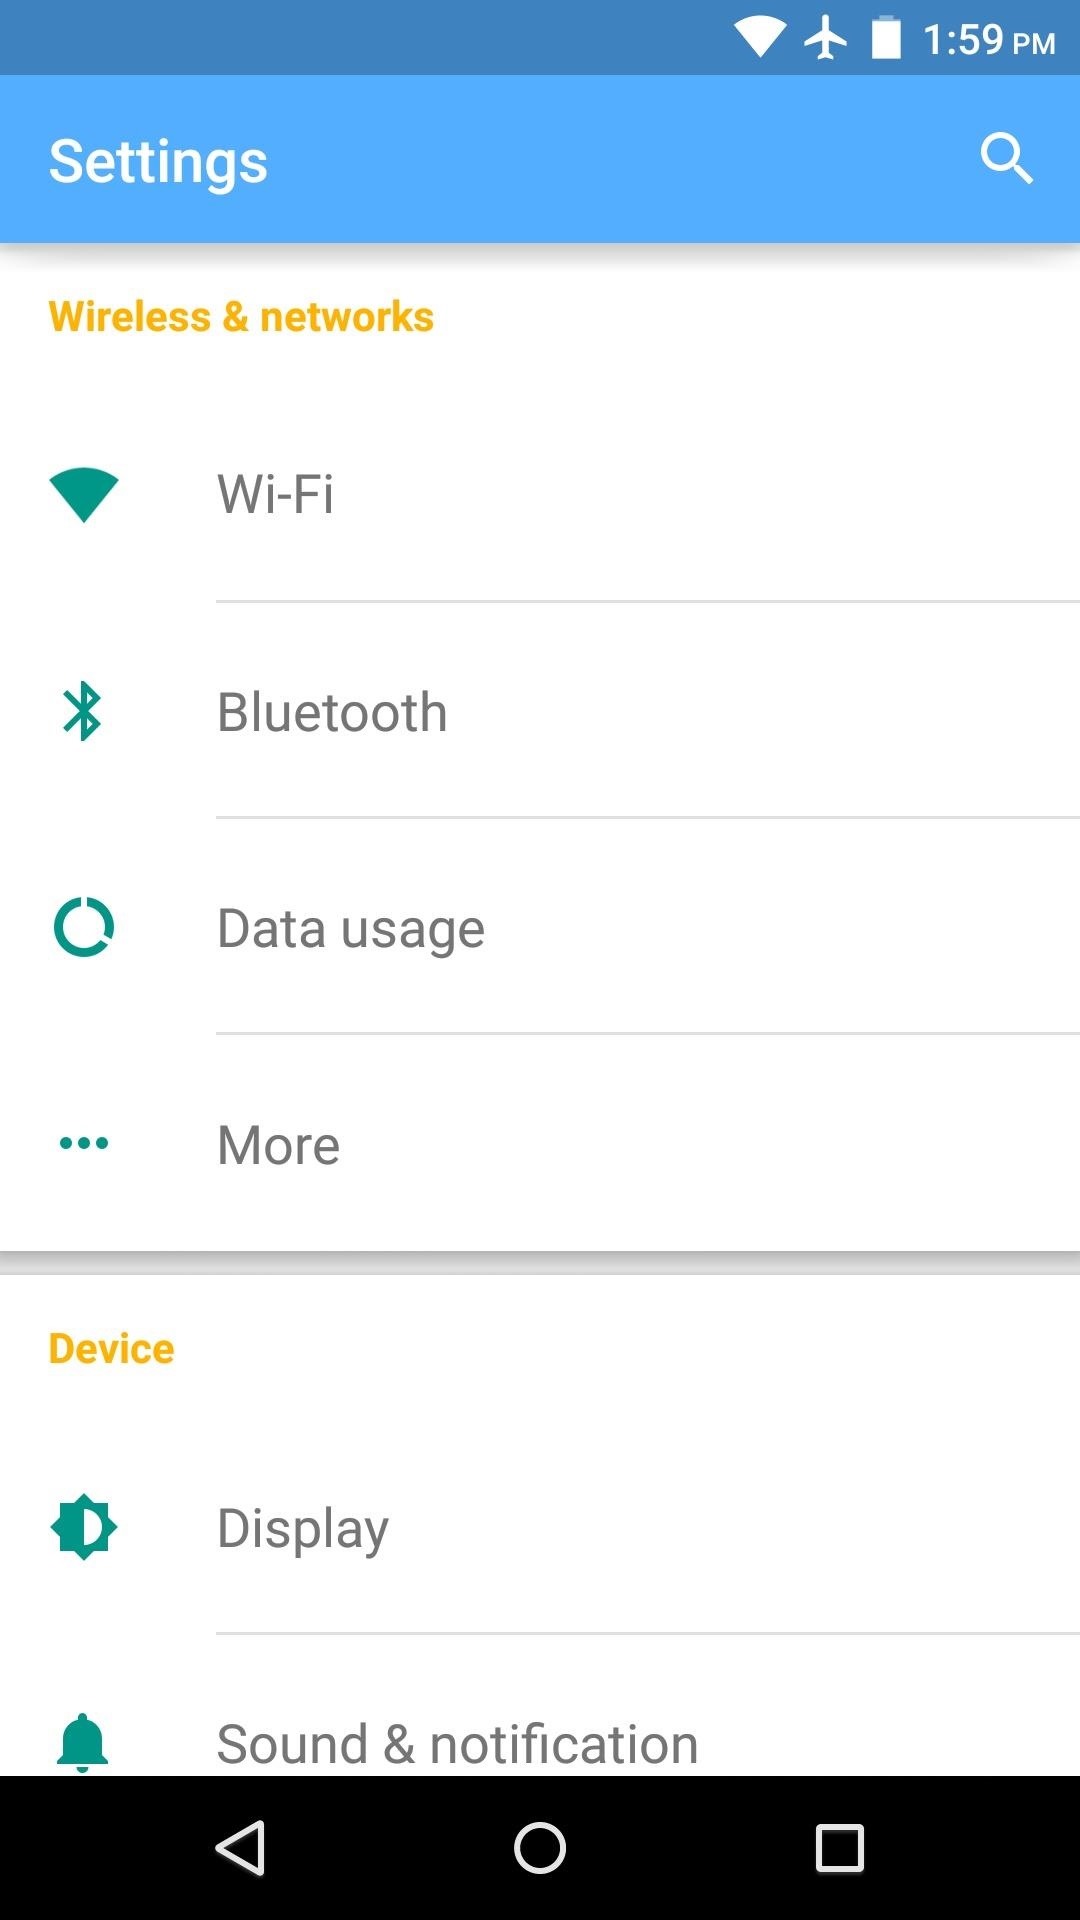 How to Theme Android Lollipop with Custom Colors